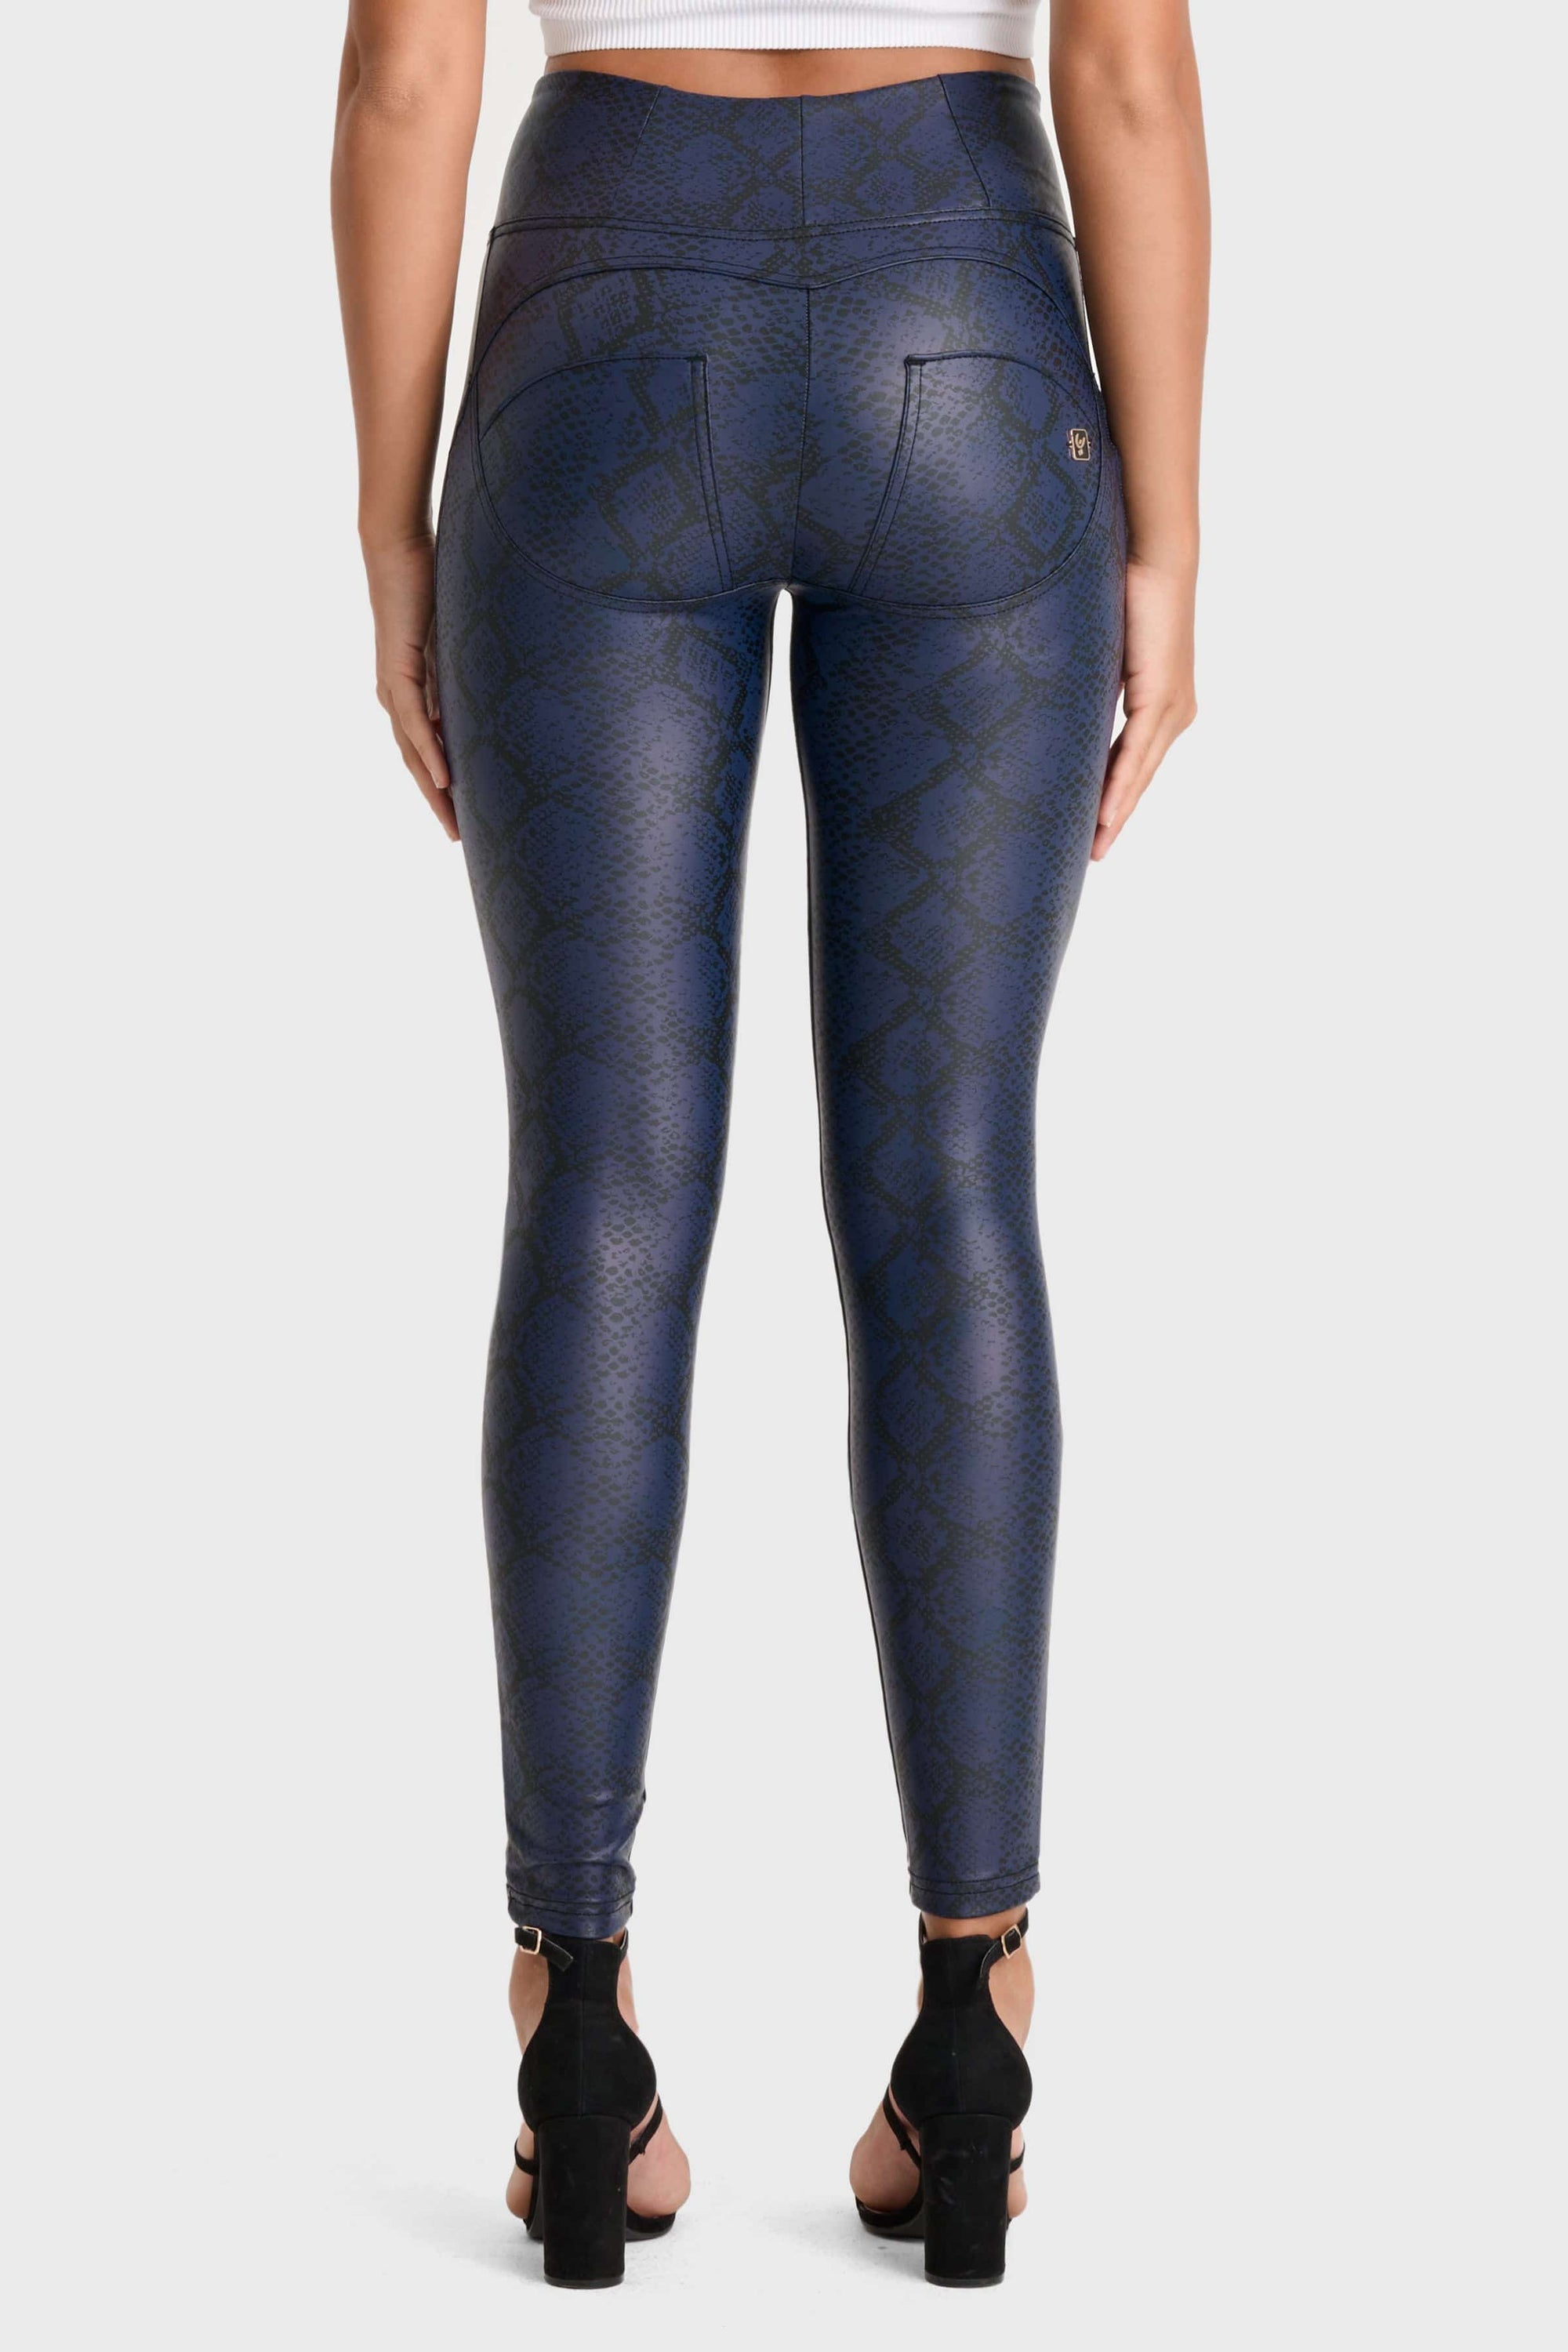 WR.UP® Python Faux Leather Limited Edition - High Waisted - Full Length - Midnight Blue 3